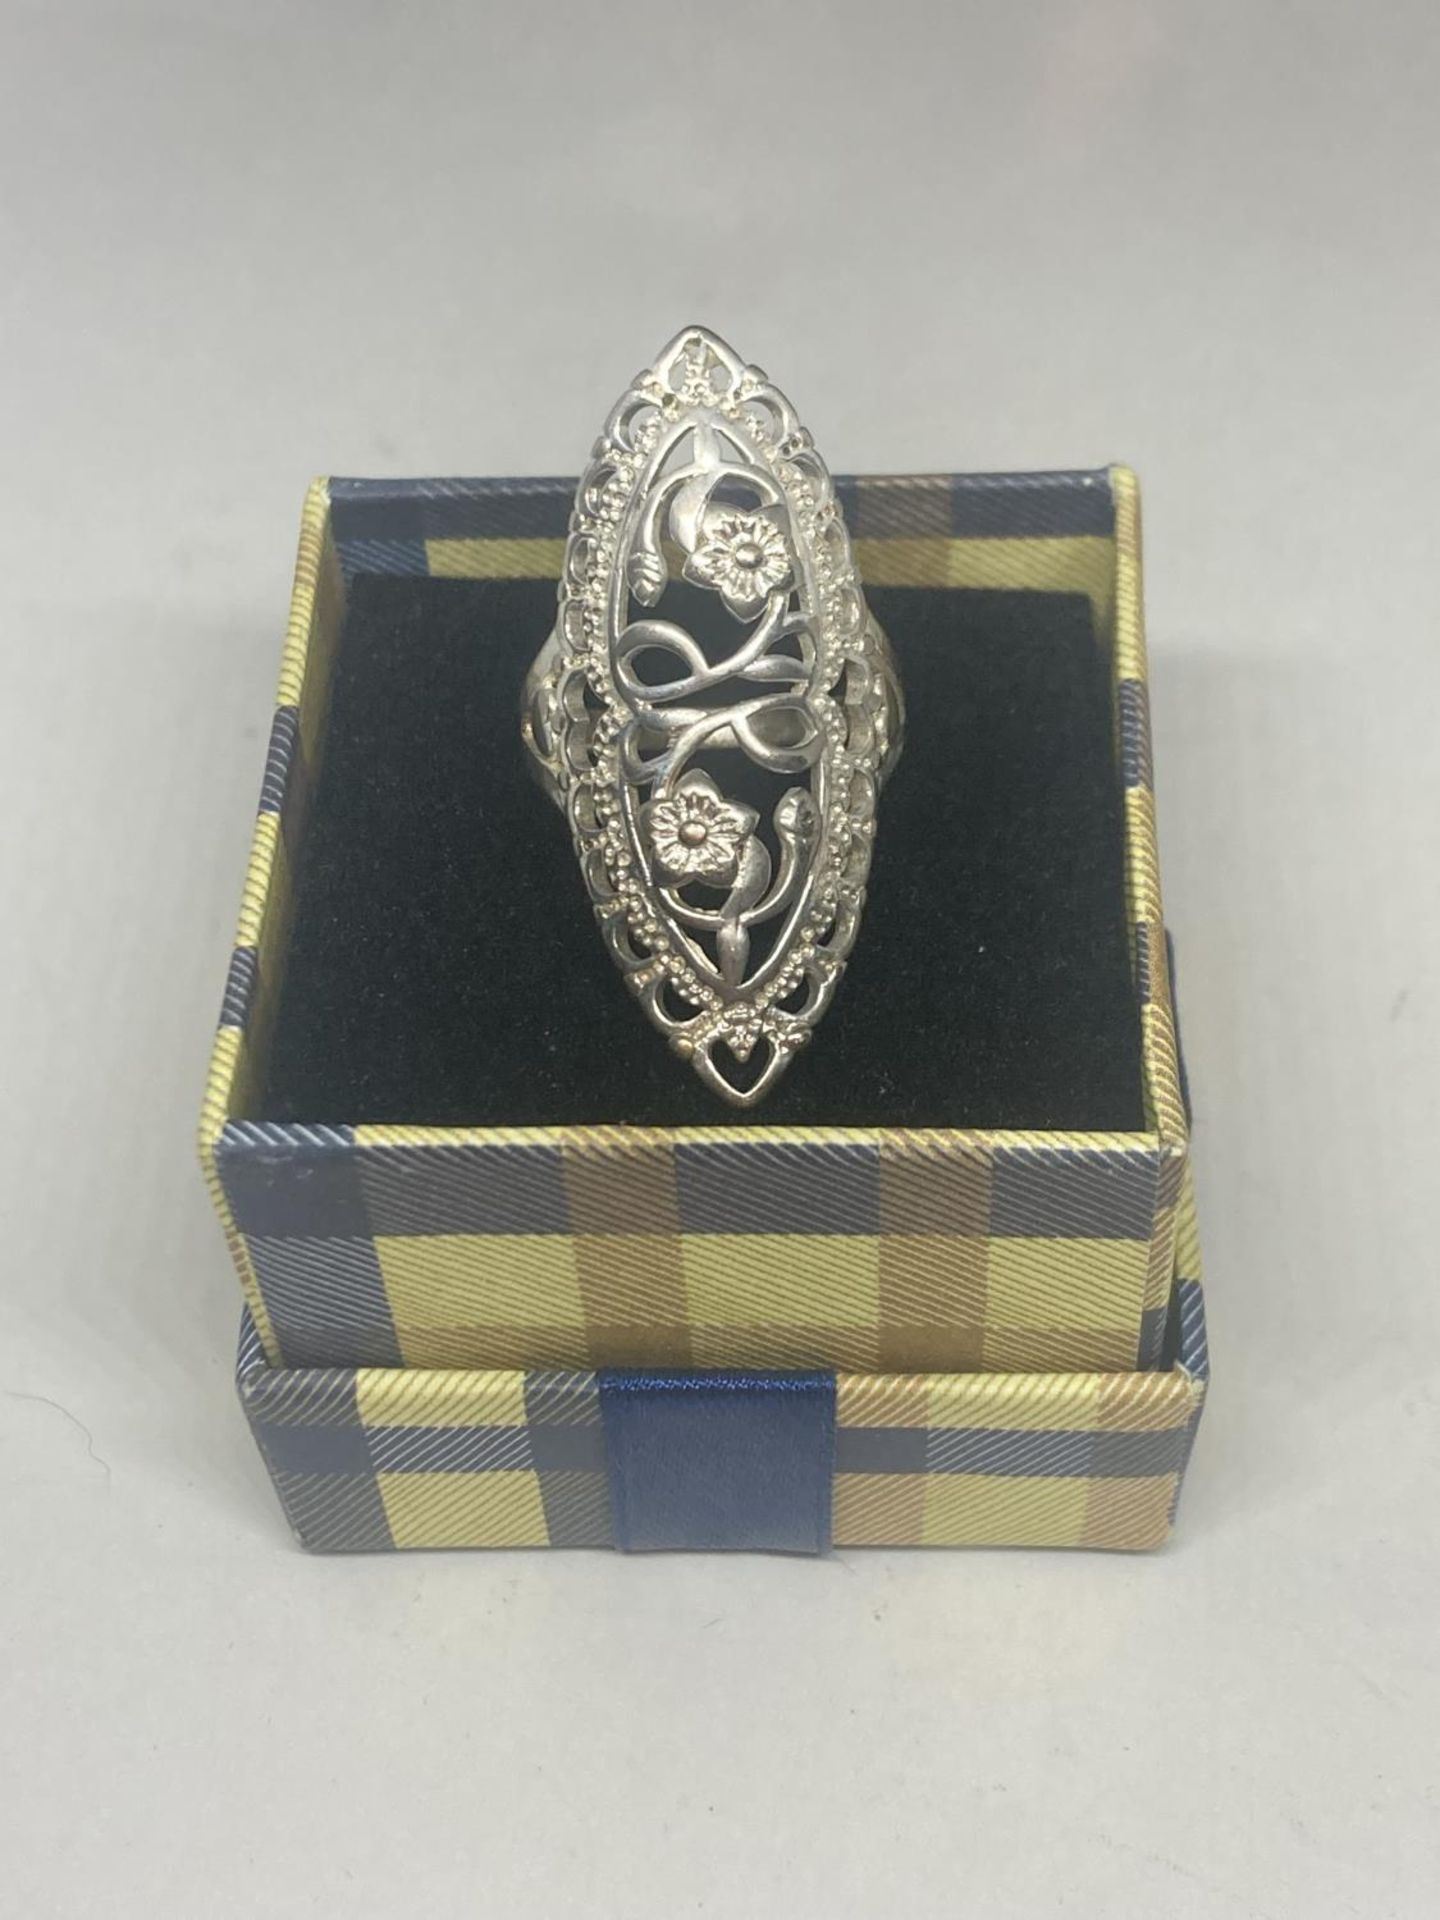 A MARKED 925 LARGE DECORATIVE FLORAL RING IN A PRESENTATION BOX - Image 2 of 6